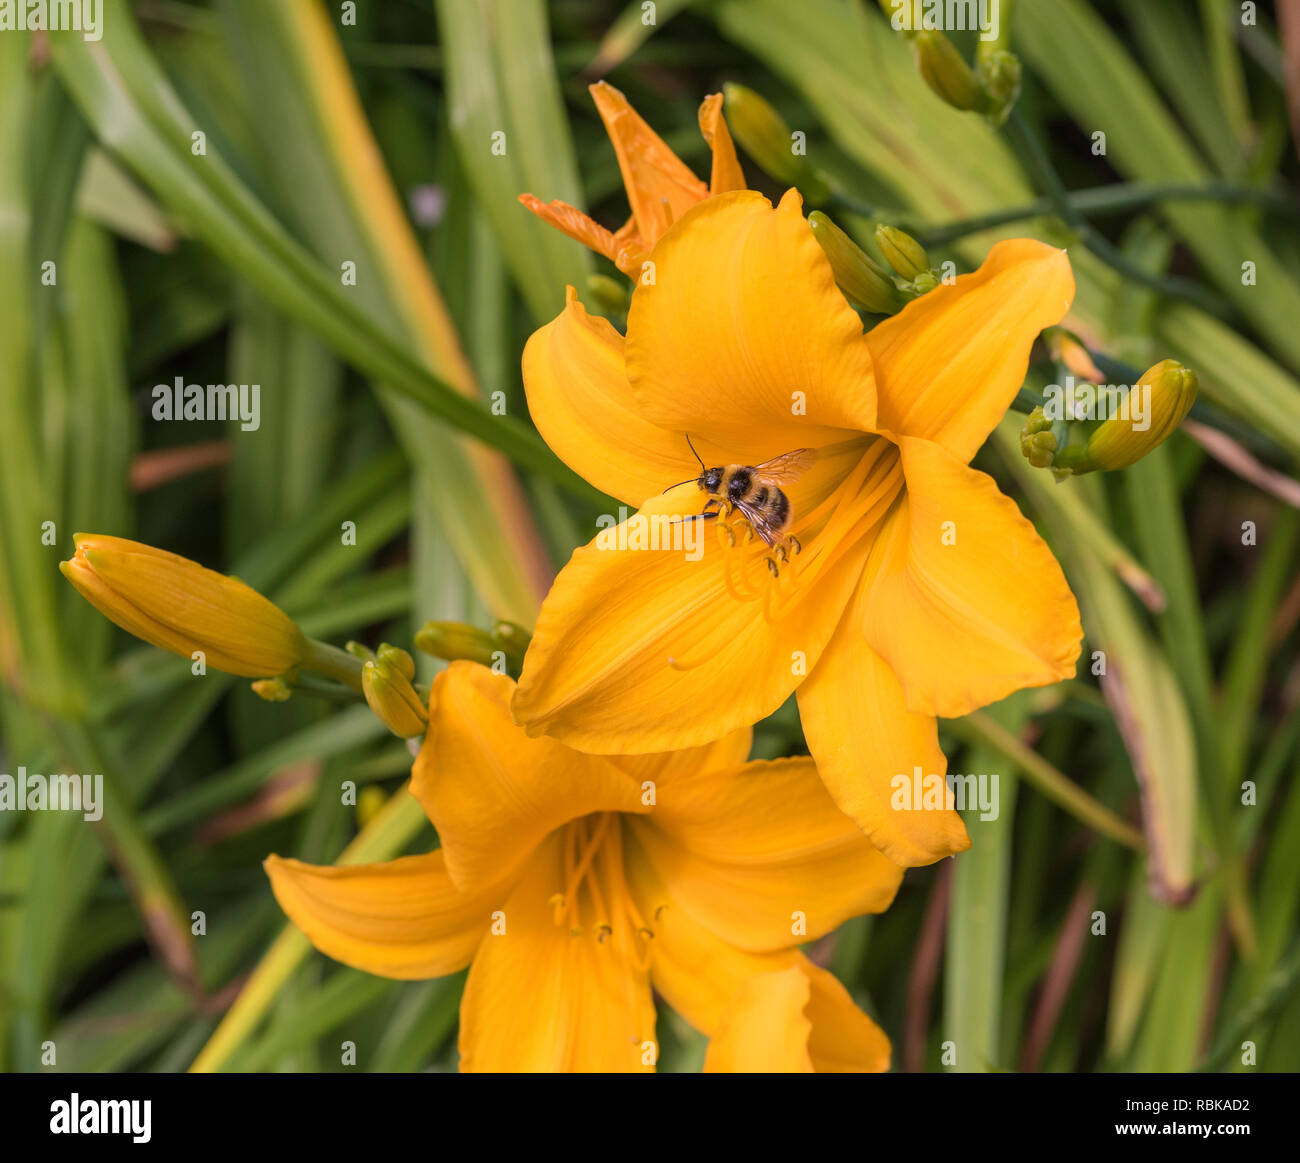 Color outdoor nature macro image of a blooming yellow daylily blossom with a bee in it on natural green blurred background taken on a sunny summer day Stock Photo